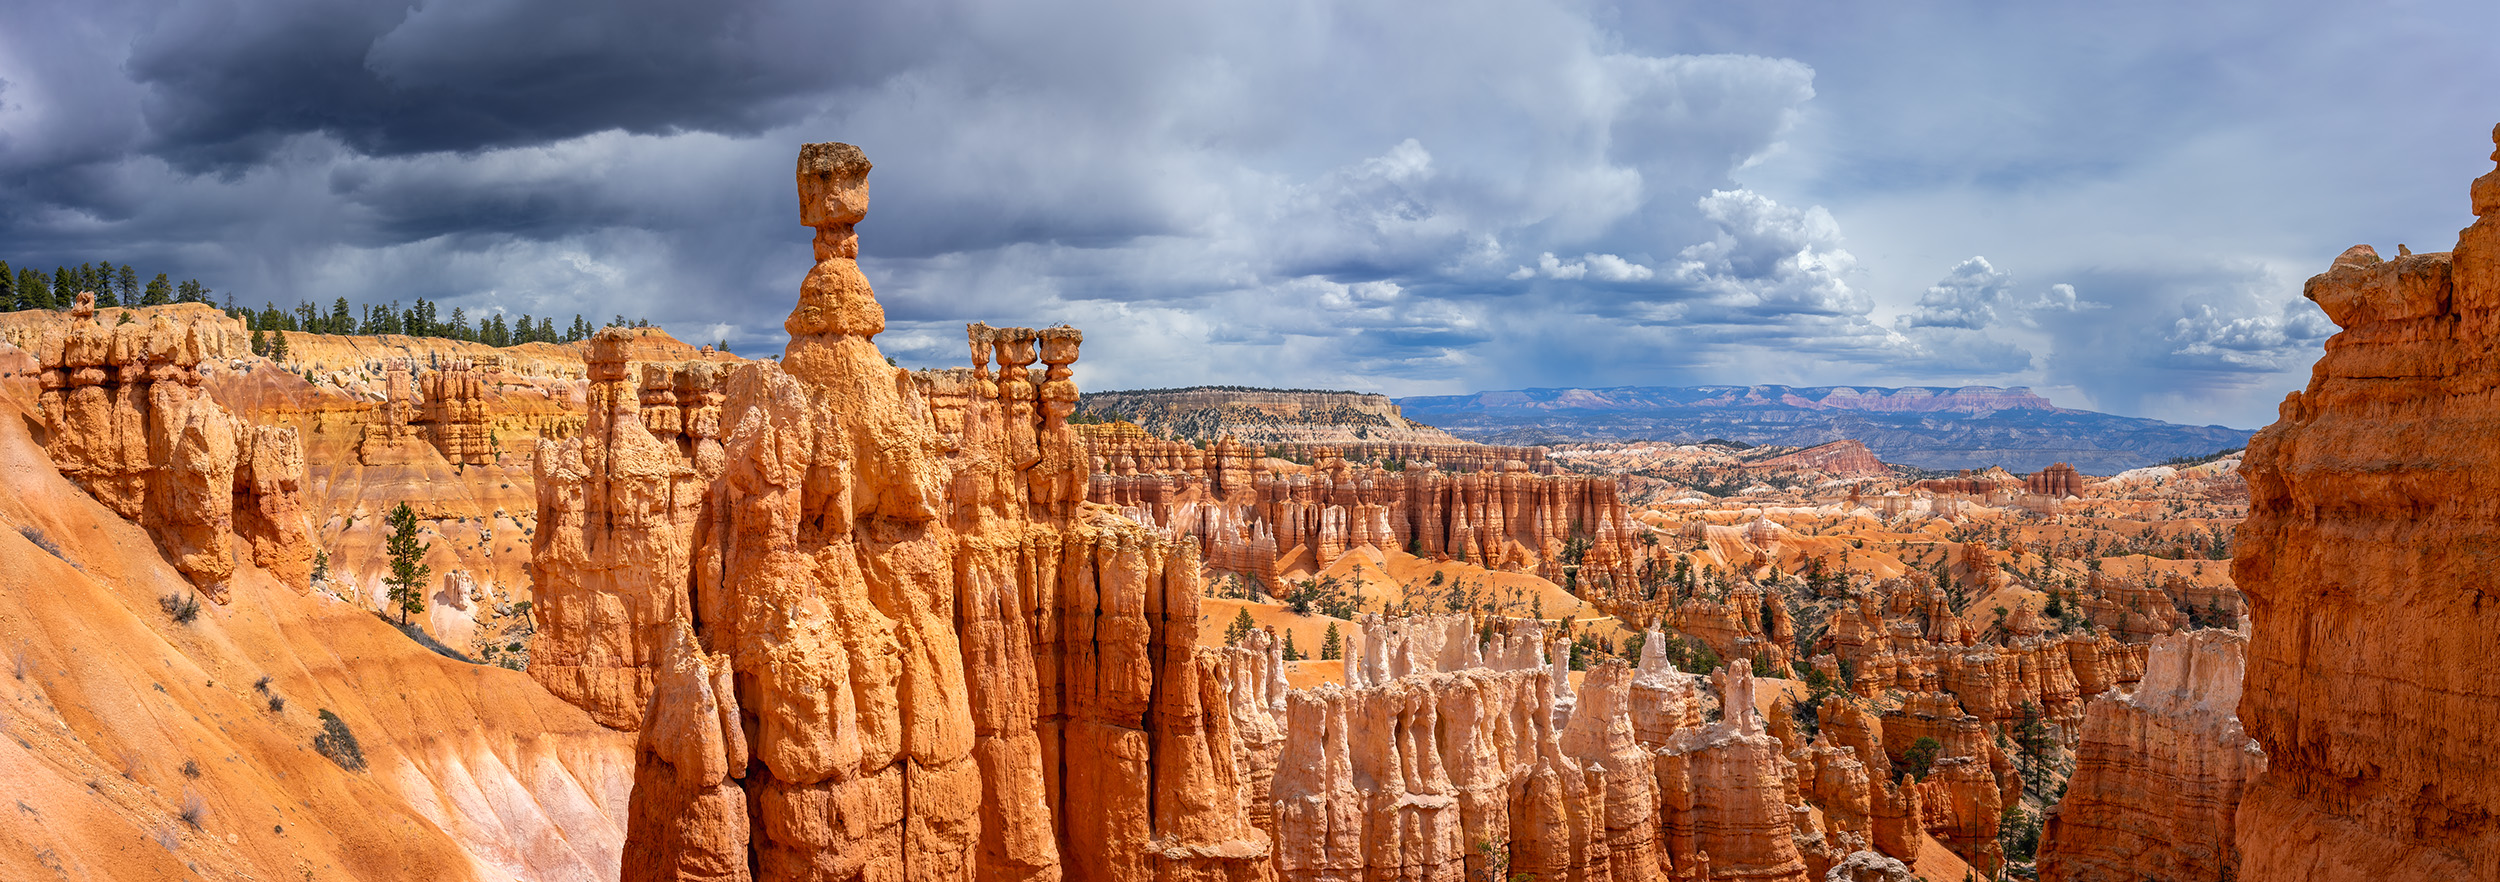 This striking panoramic image captures the iconic Thor's Hammer in Bryce Canyon, Utah. Bathed in brilliant light, the rock formations...